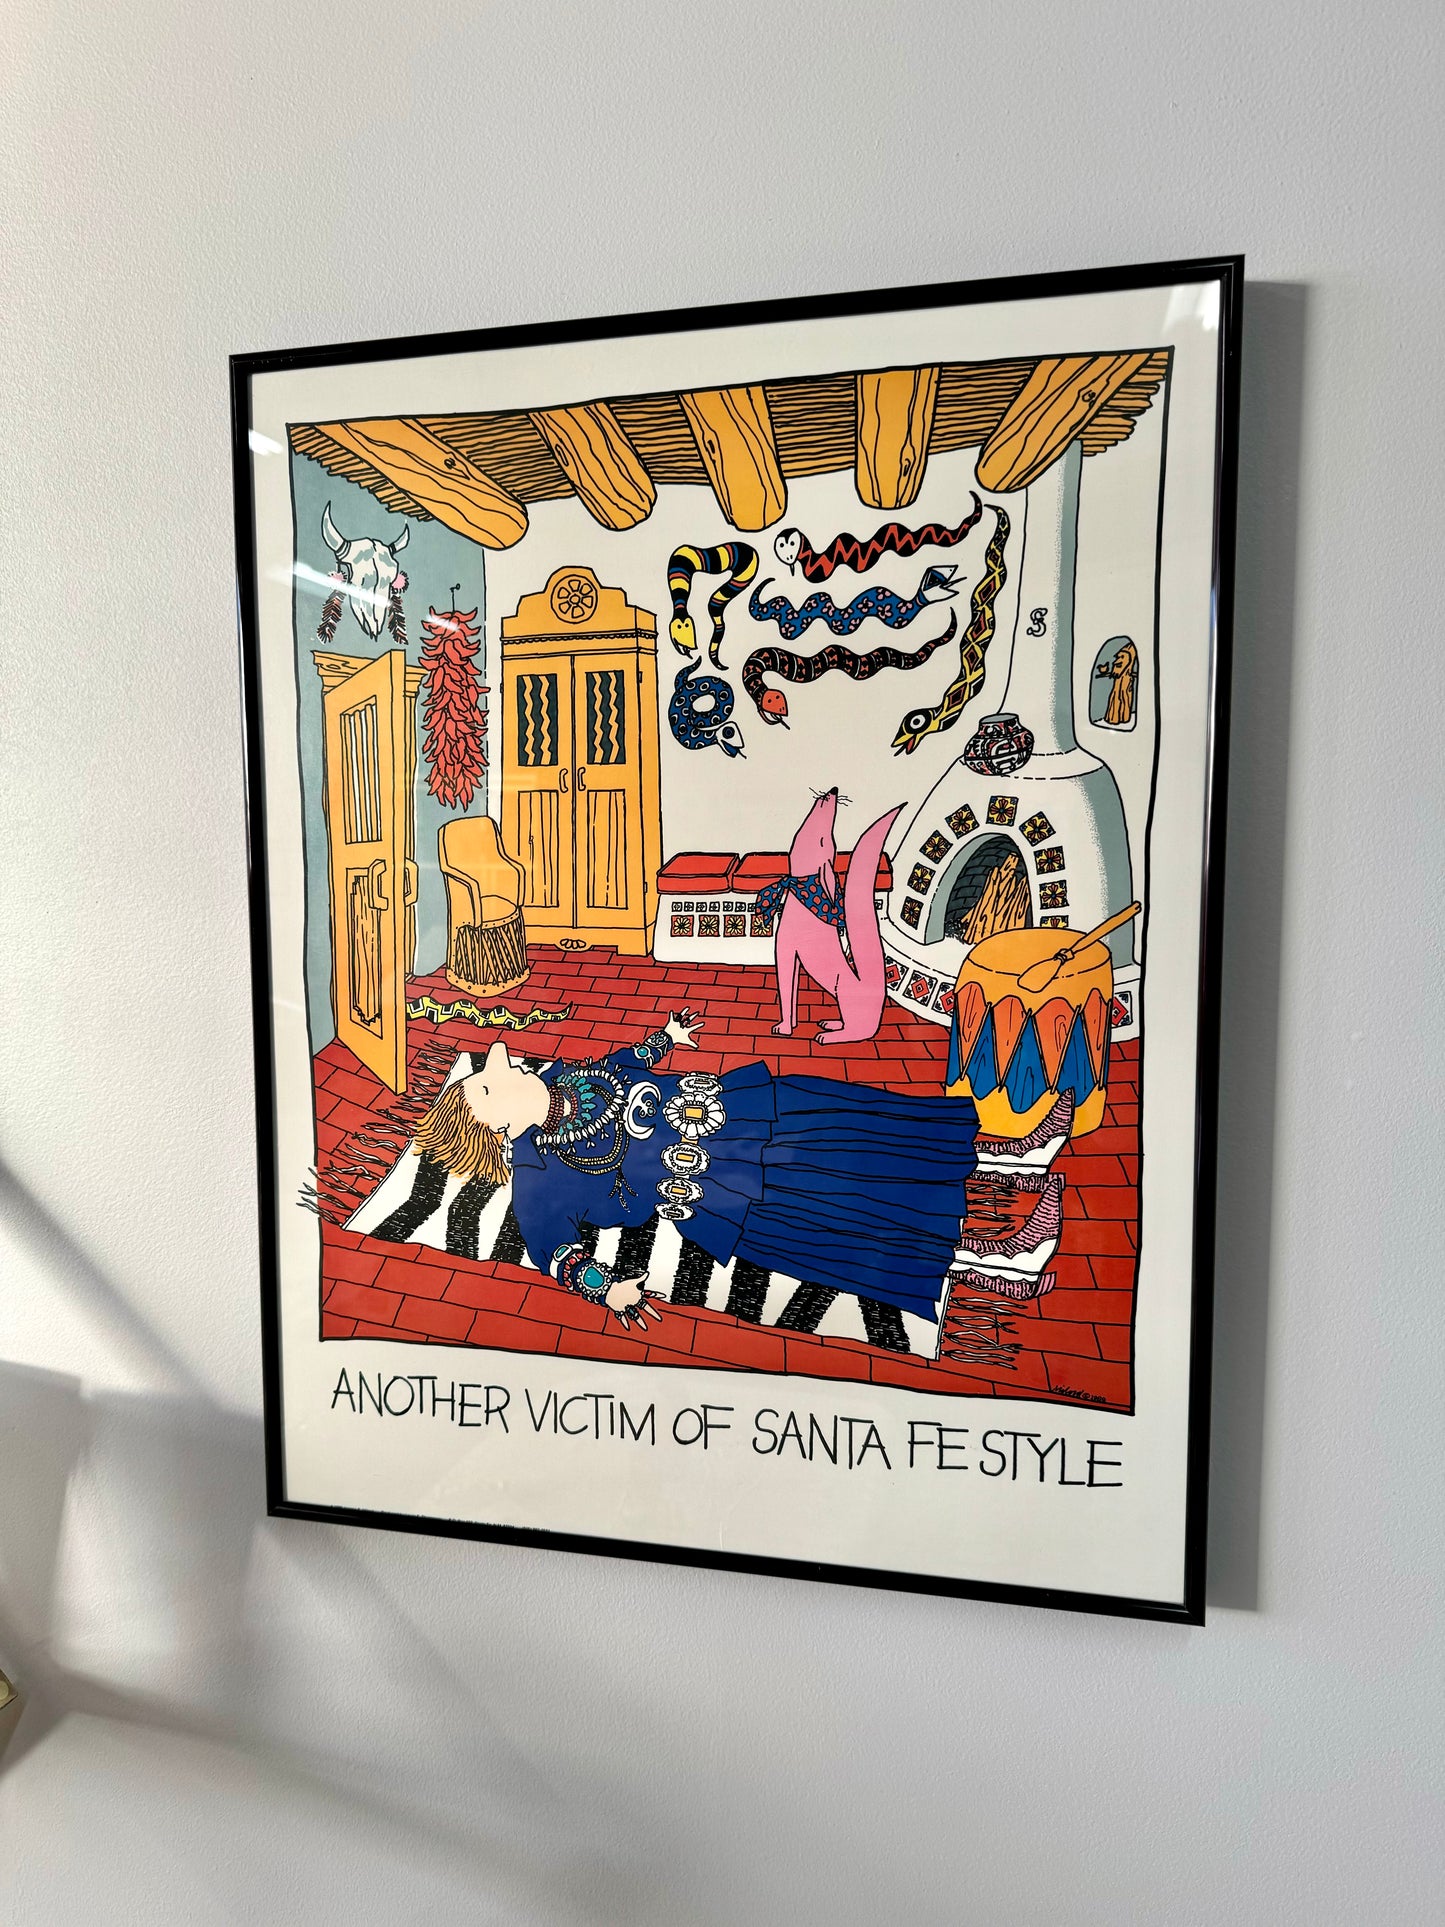 Vintage 1989 “Another Victim Of Santa Fe Style” Jerome Milord Framed Poster